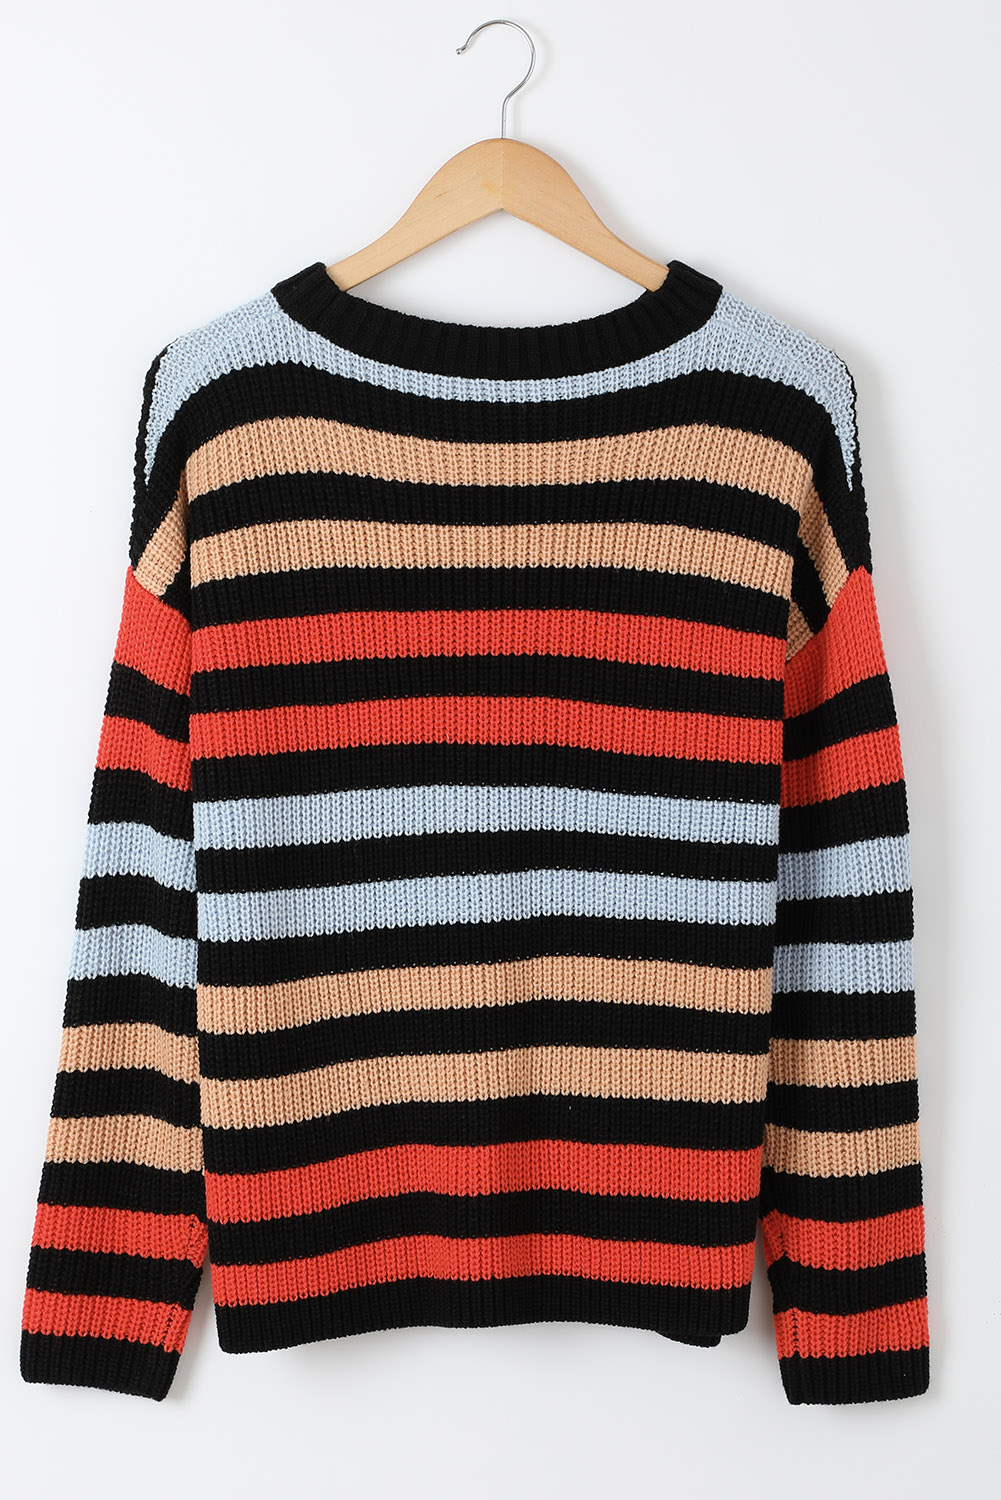 Ladies striped casual sweateres (10)